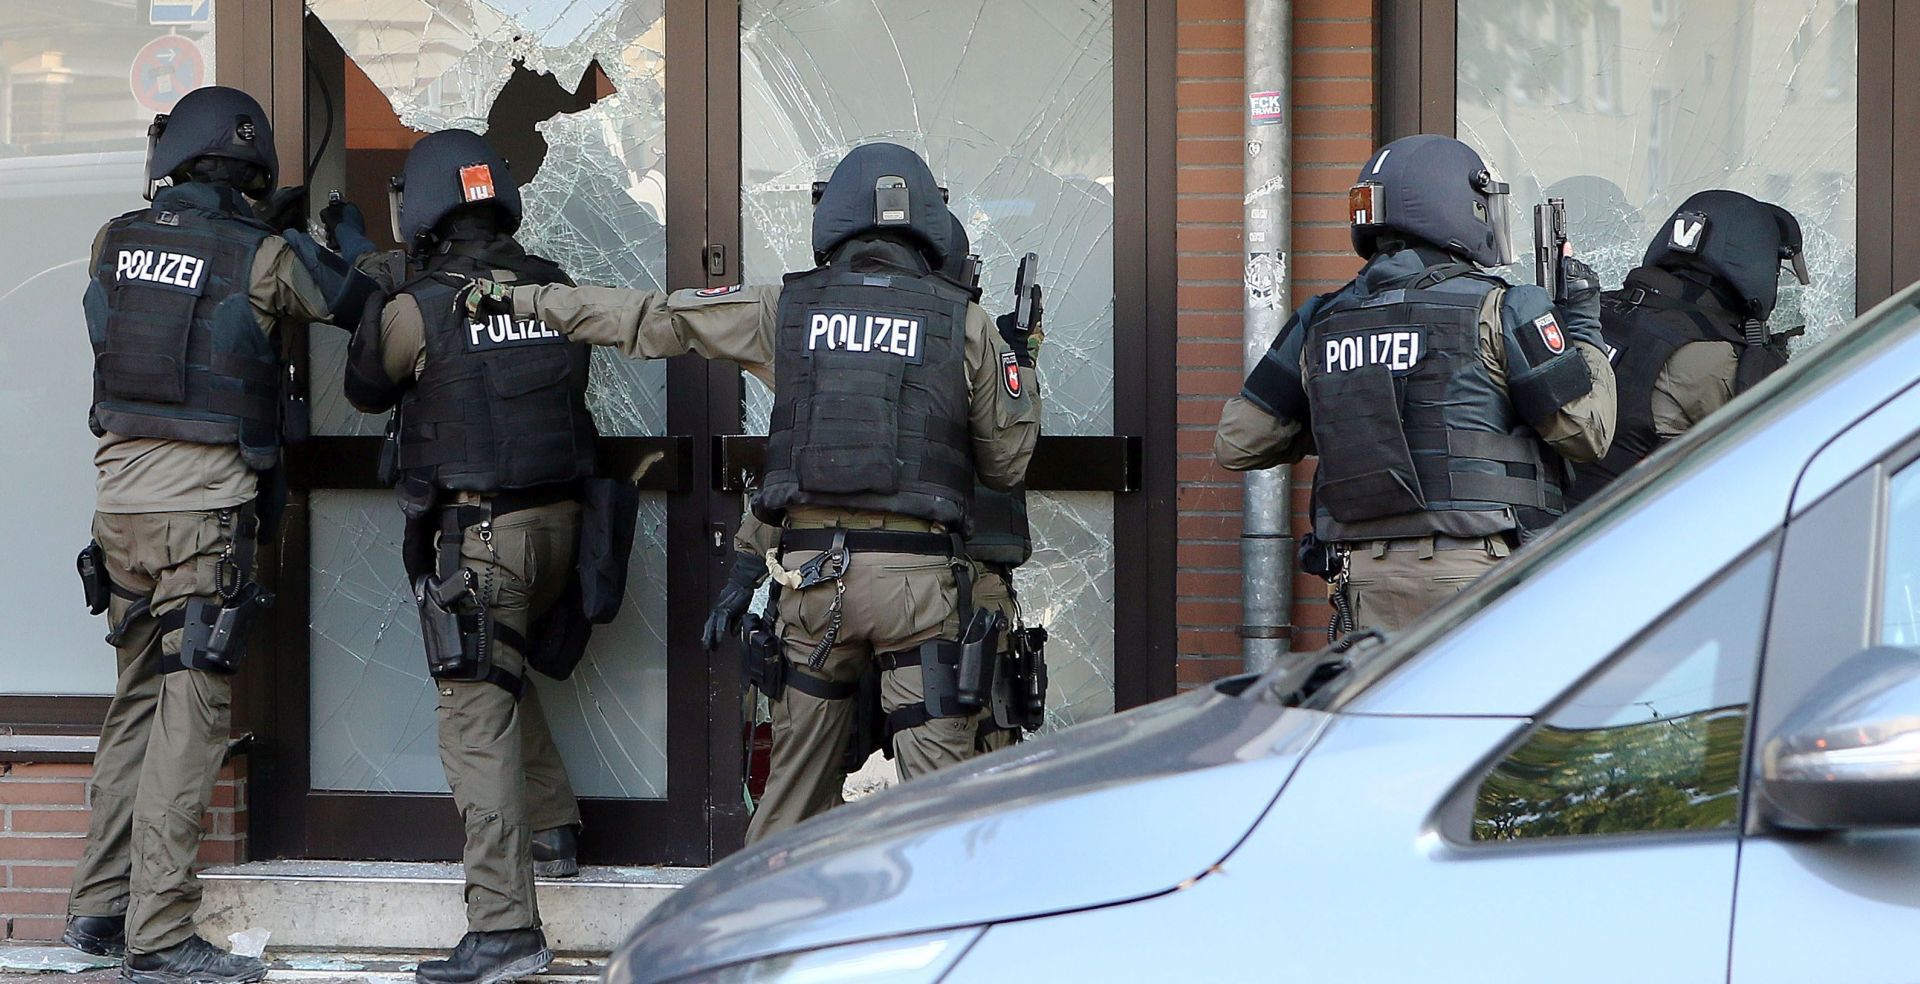 epa05444014 Arme dpolice officers participate in an operation in Hildeshein, Germany, 27 July 2016. The Police raided the rooms of the Mosque 'Deutschsprachiger Islamkreis Hildesheim e.V.' (DIK) as well as the apartments of eight board members of the organization. According to the Lower Saxony Interior Ministry, the DIK in Hildesheim is considered a nationwide hotspot for the radical salafist scene.  EPA/Chris Gossmann